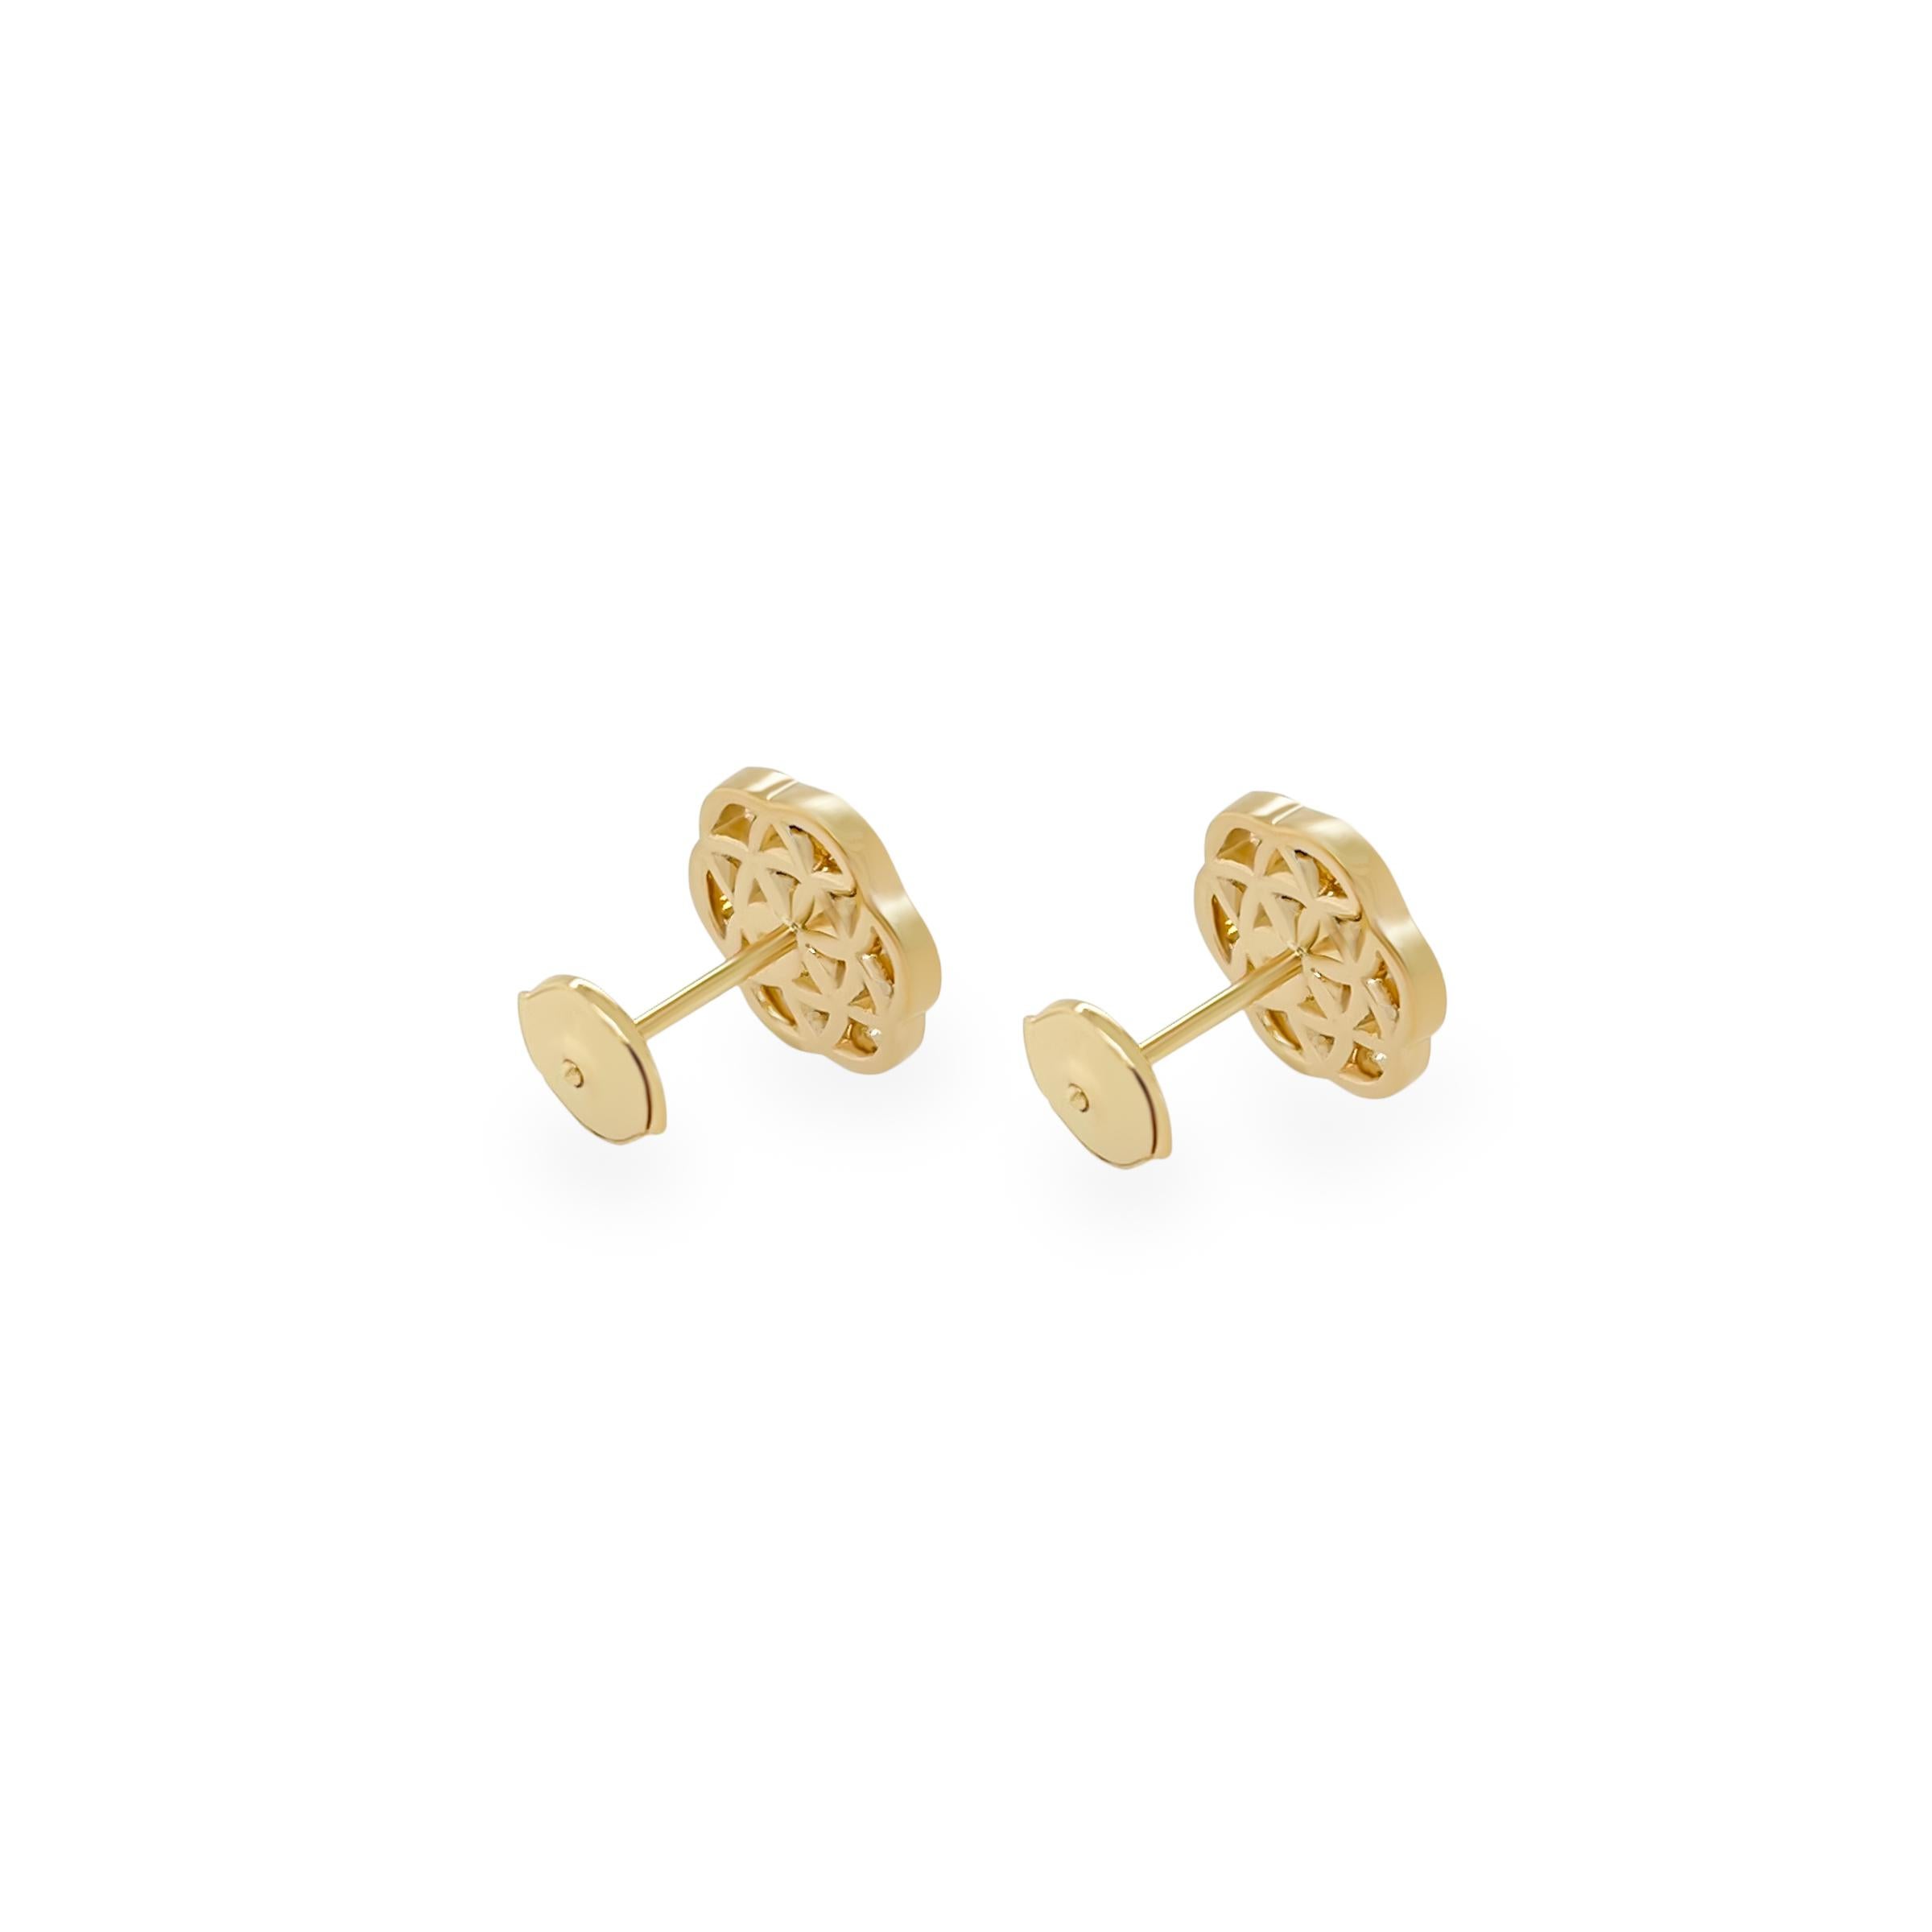 Our Flower of Life Earrings are expertly crafted from shimmering 18k yellow gold and high quality diamonds. This intricate design captures the essence of interconnectedness and is a symbol of harmony for all living things with micro pave'd diamonds.